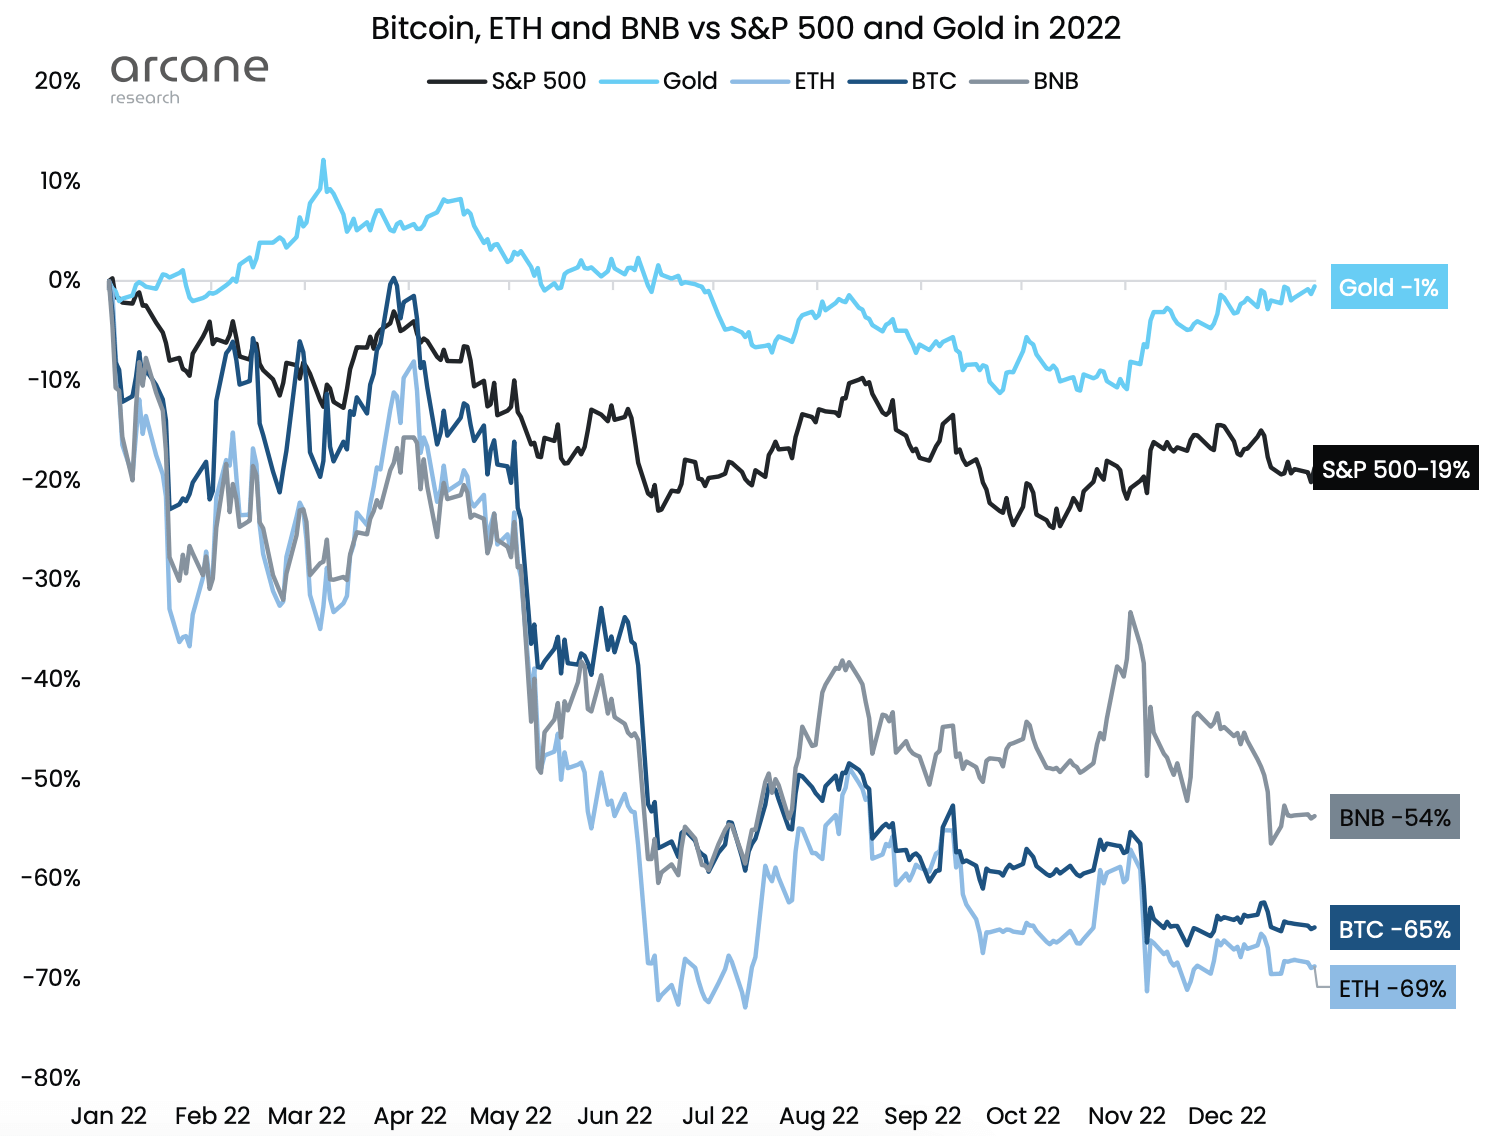 BTC, ETH, BNB, S&P500, and Gold in 2022